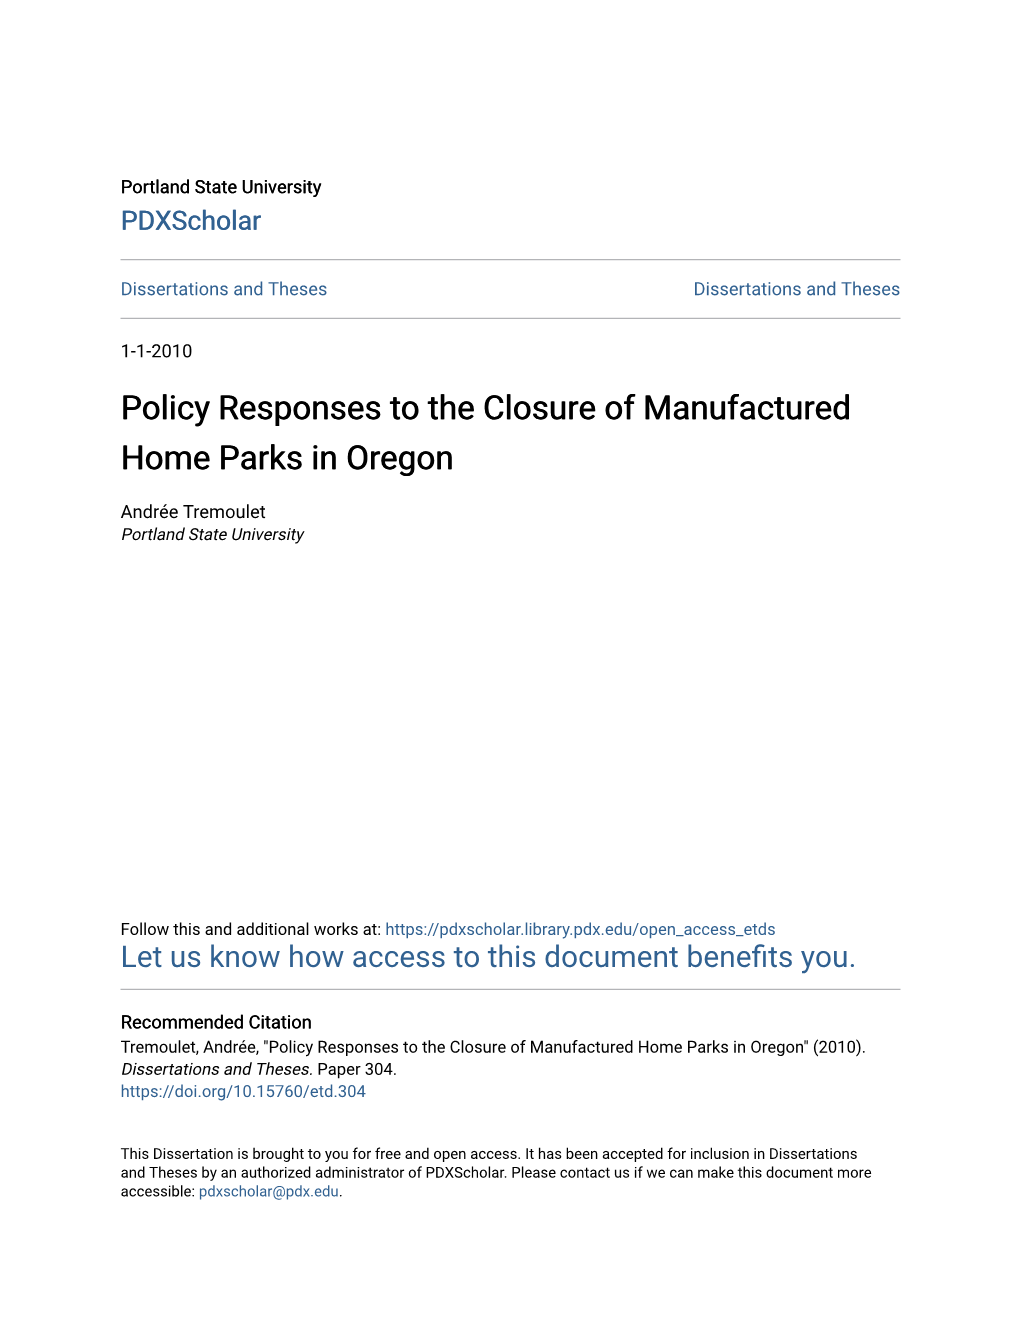 Policy Responses to the Closure of Manufactured Home Parks in Oregon